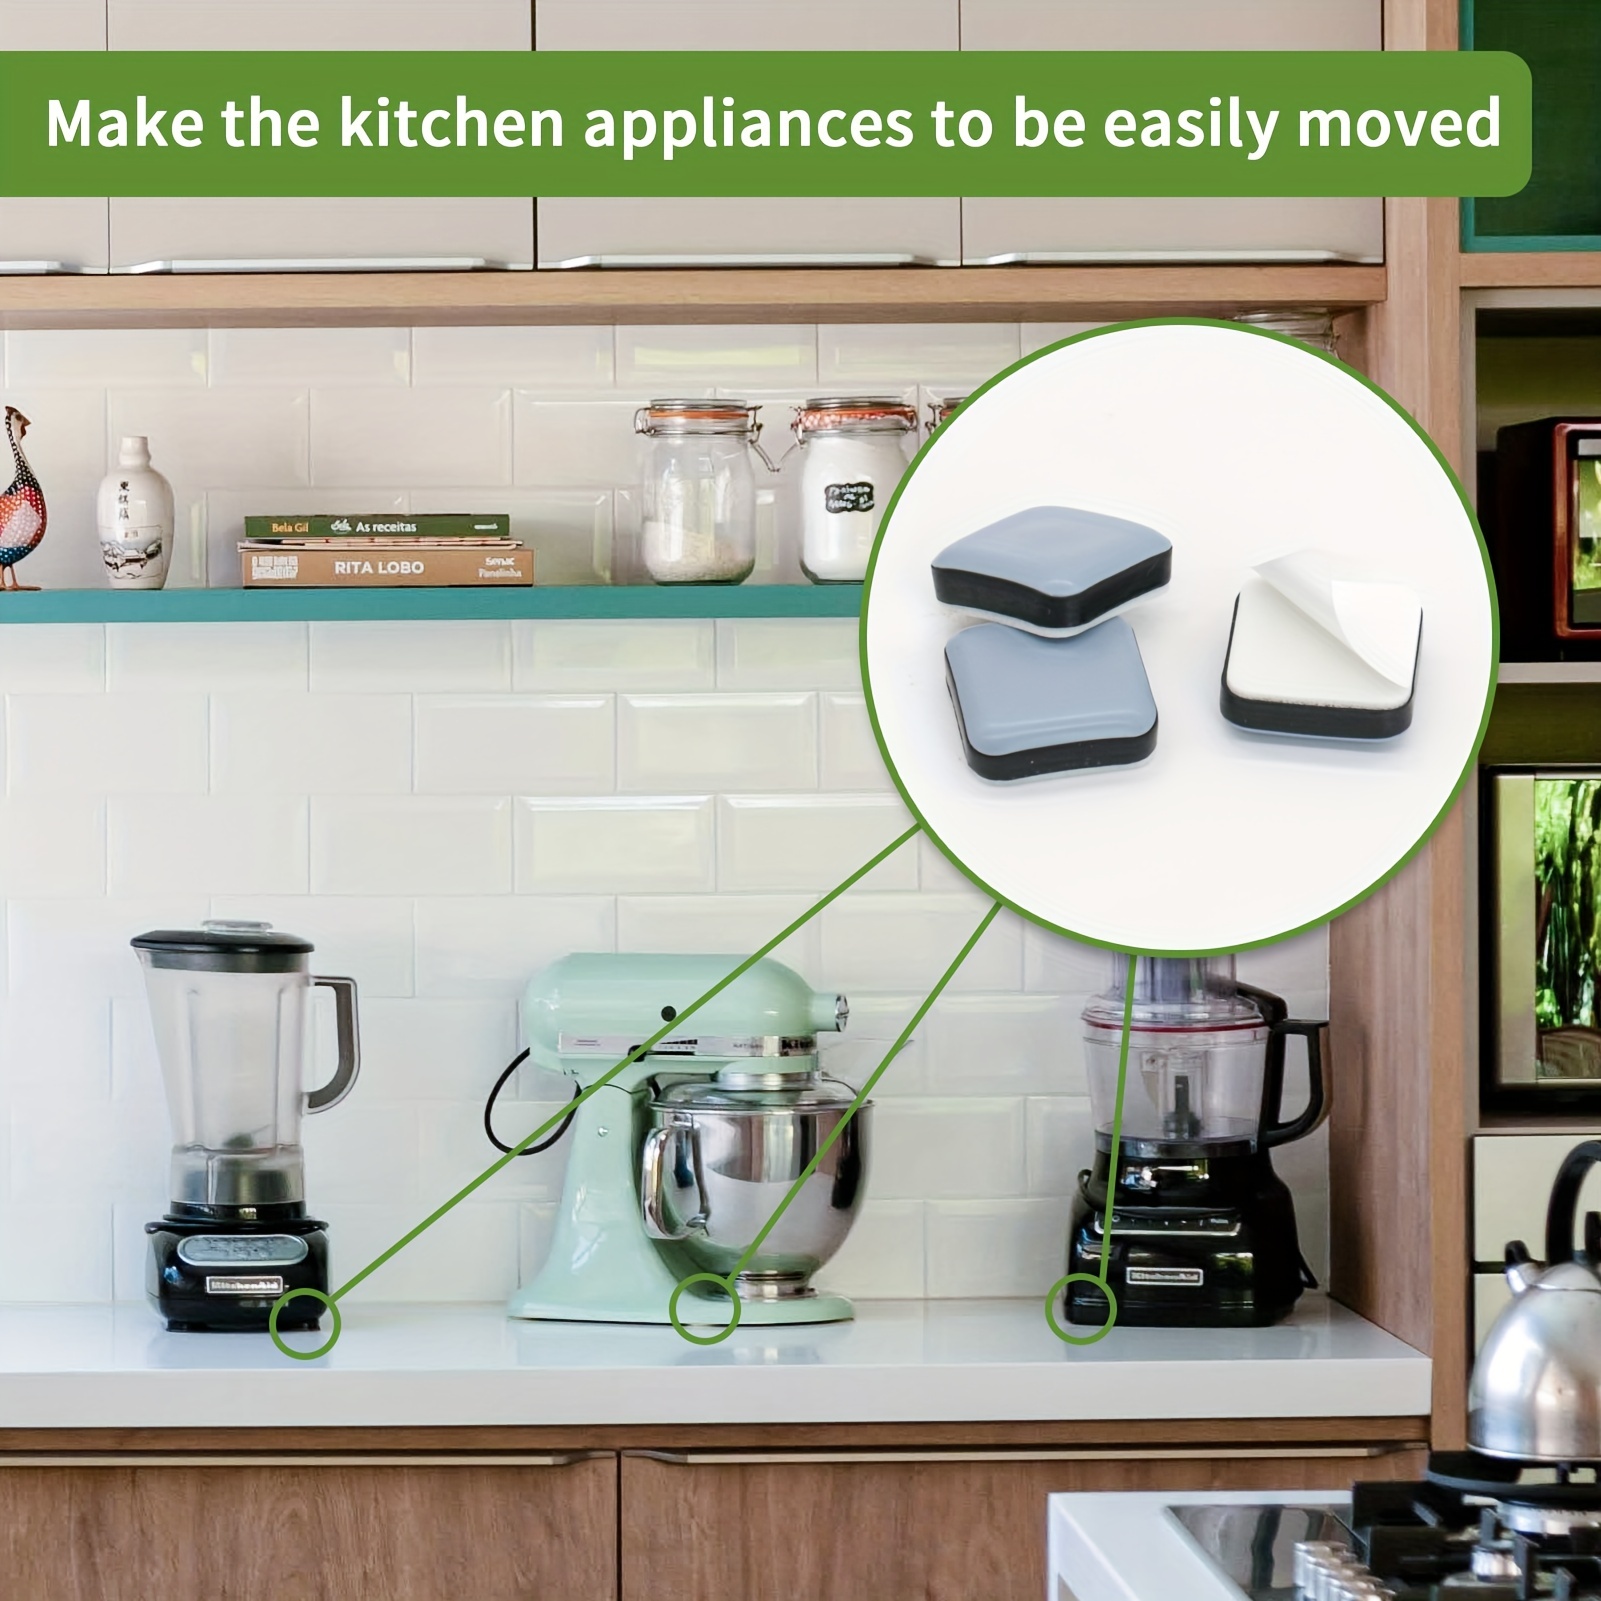 Self Adhesive Kitchen Appliance Sliders (DIY) - Easy Moving Pads Compatible with Most Blenders, Coffee Makers, Air Fryers, Pressure Cookers and More